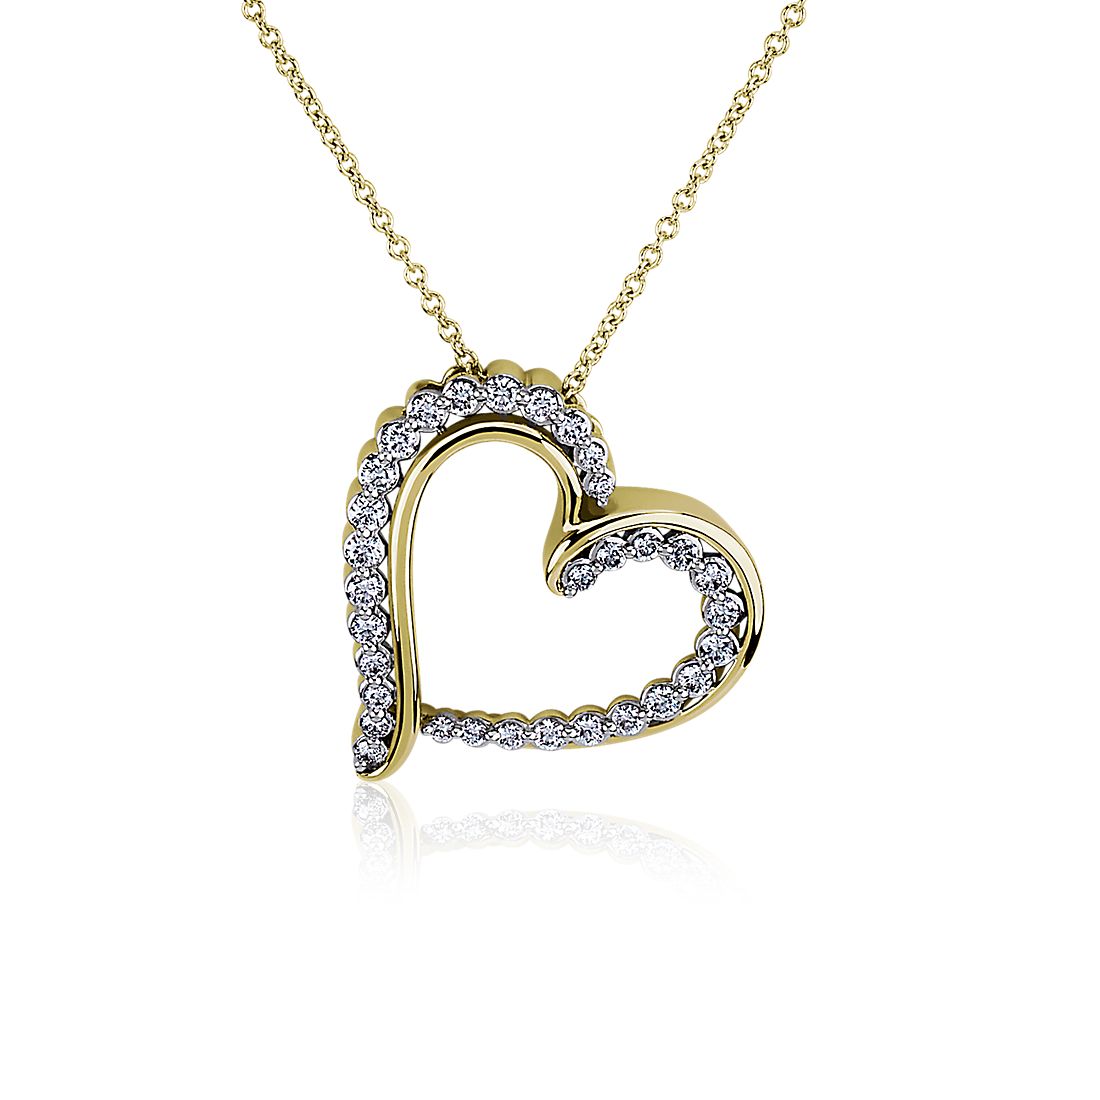 Tilted Double Row Diamond Heart Necklace in 14k Yellow Gold (0.46 ct. tw.)